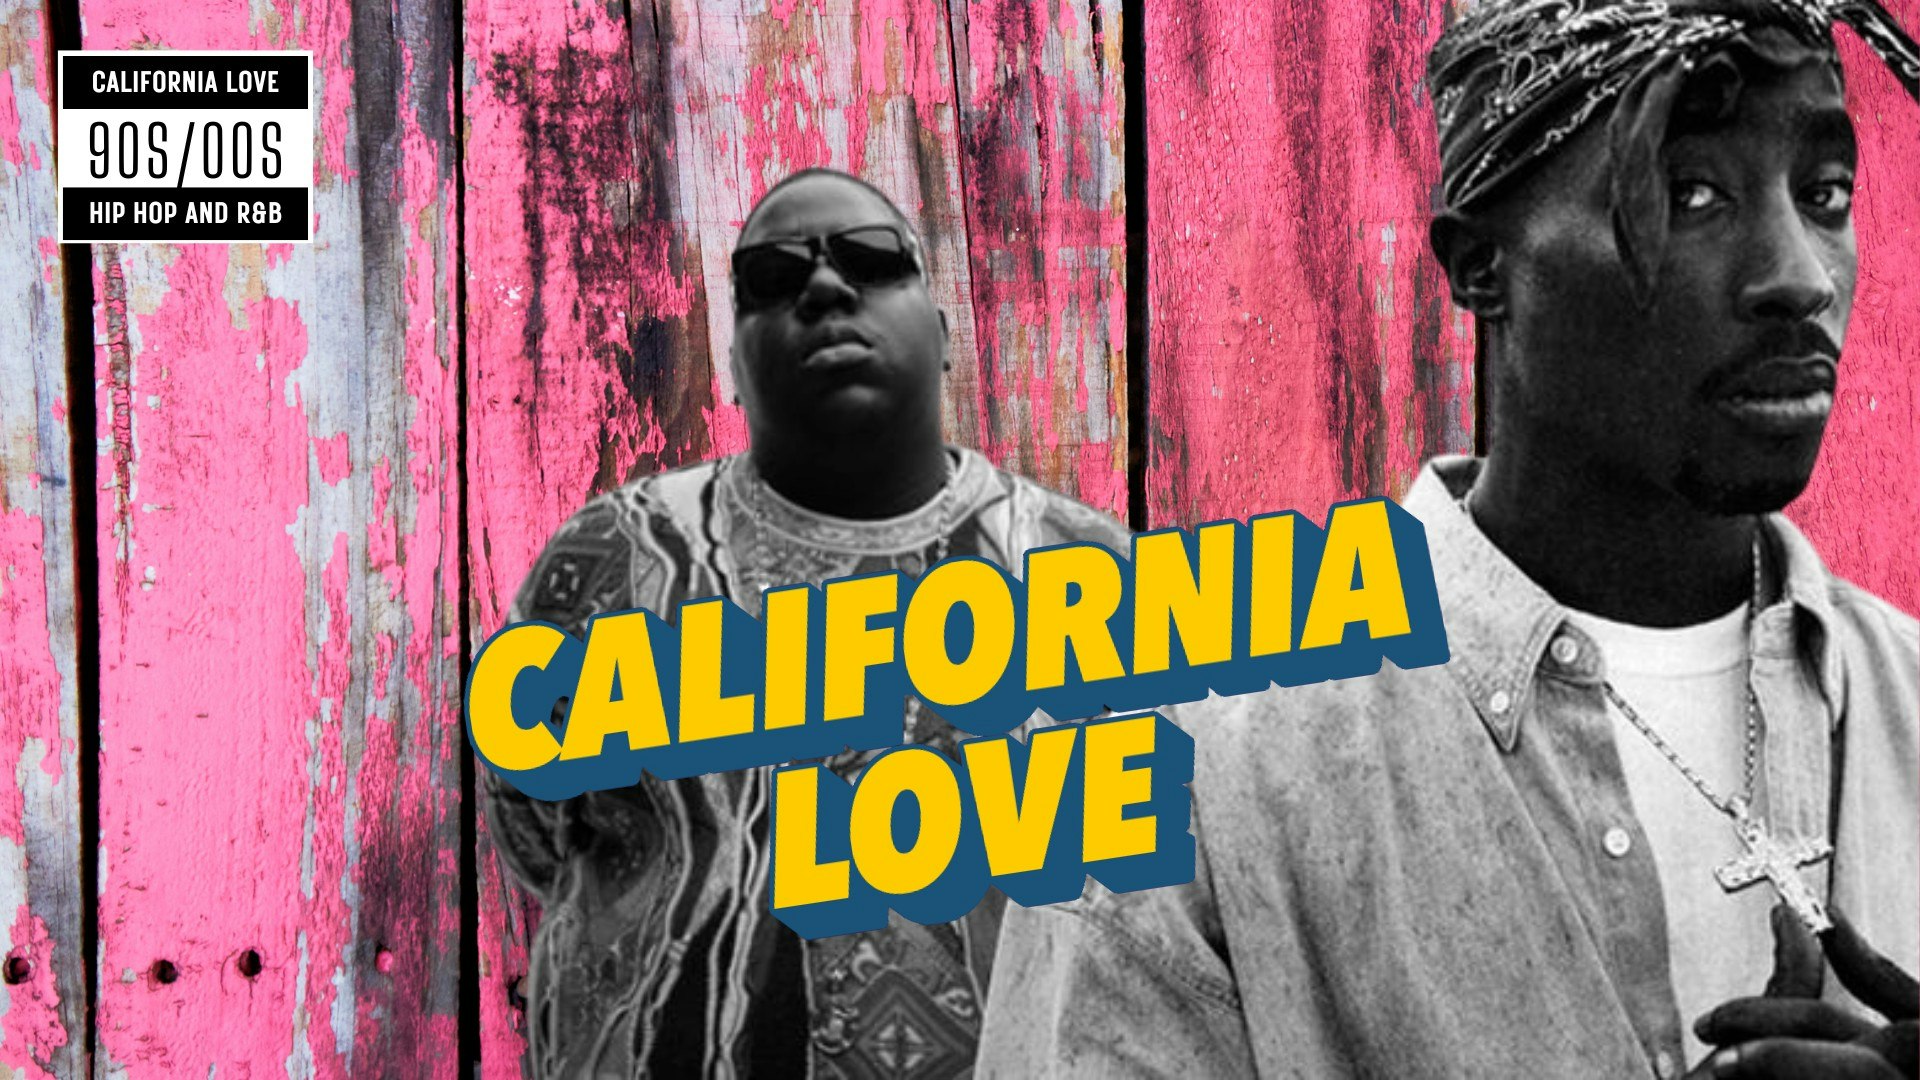 California Love (90s/00s Hip Hop and R&B) Liverpool